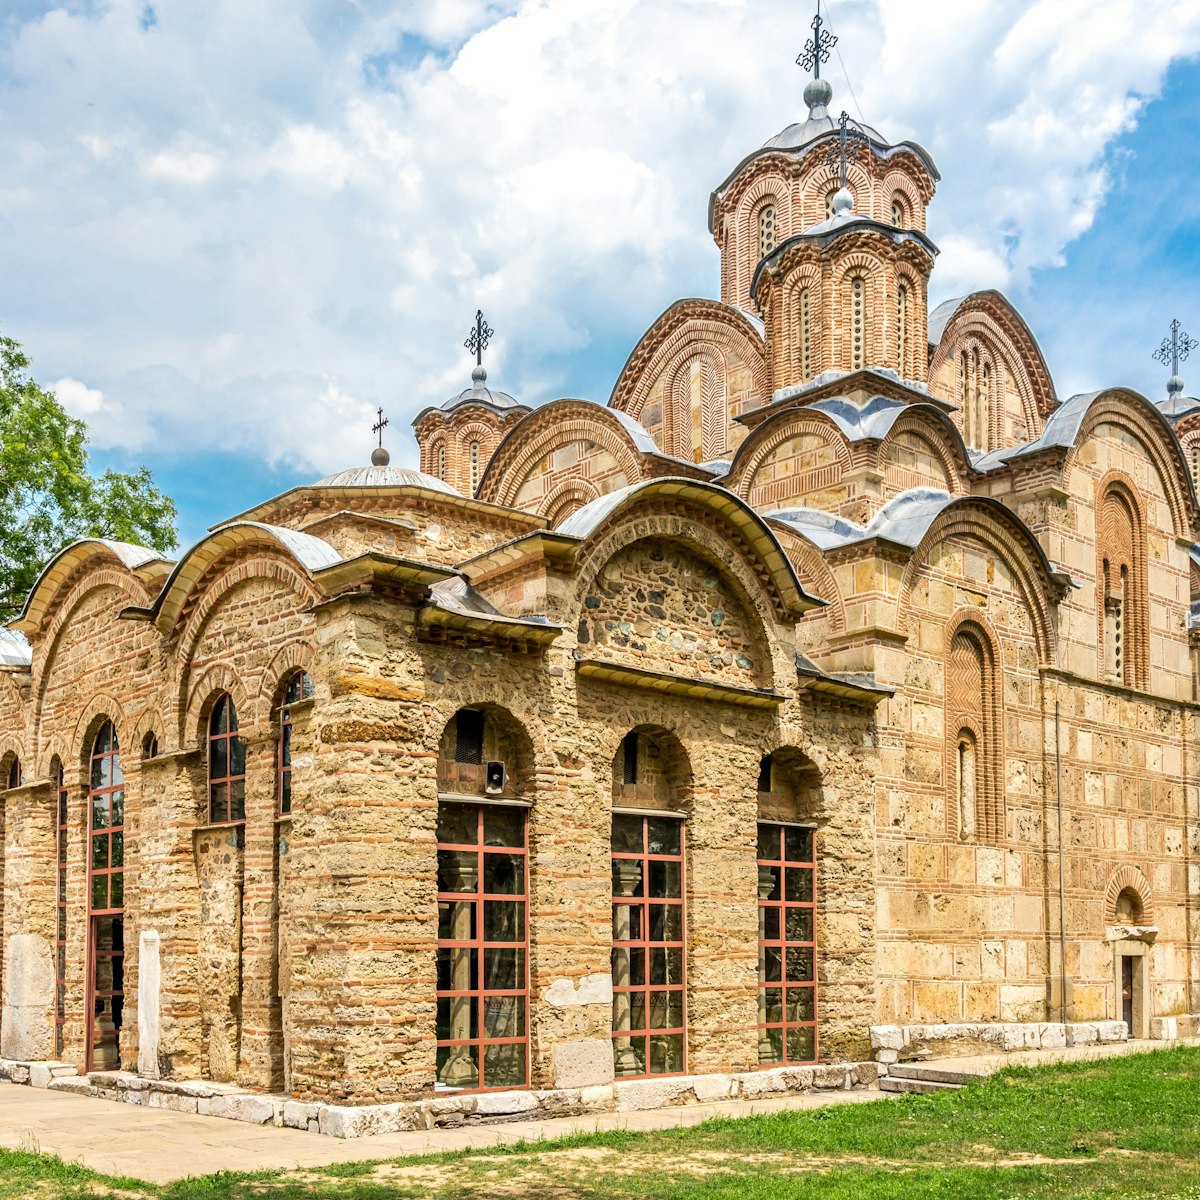 GRACANICA, KOSOVO - JULY 27,2014 - Gracanica is Orthodox monastery located in Kosovo. Gracanica was constructed on the ruins of an older 13th-century church of the Holy Virgin.; Shutterstock ID 209970181